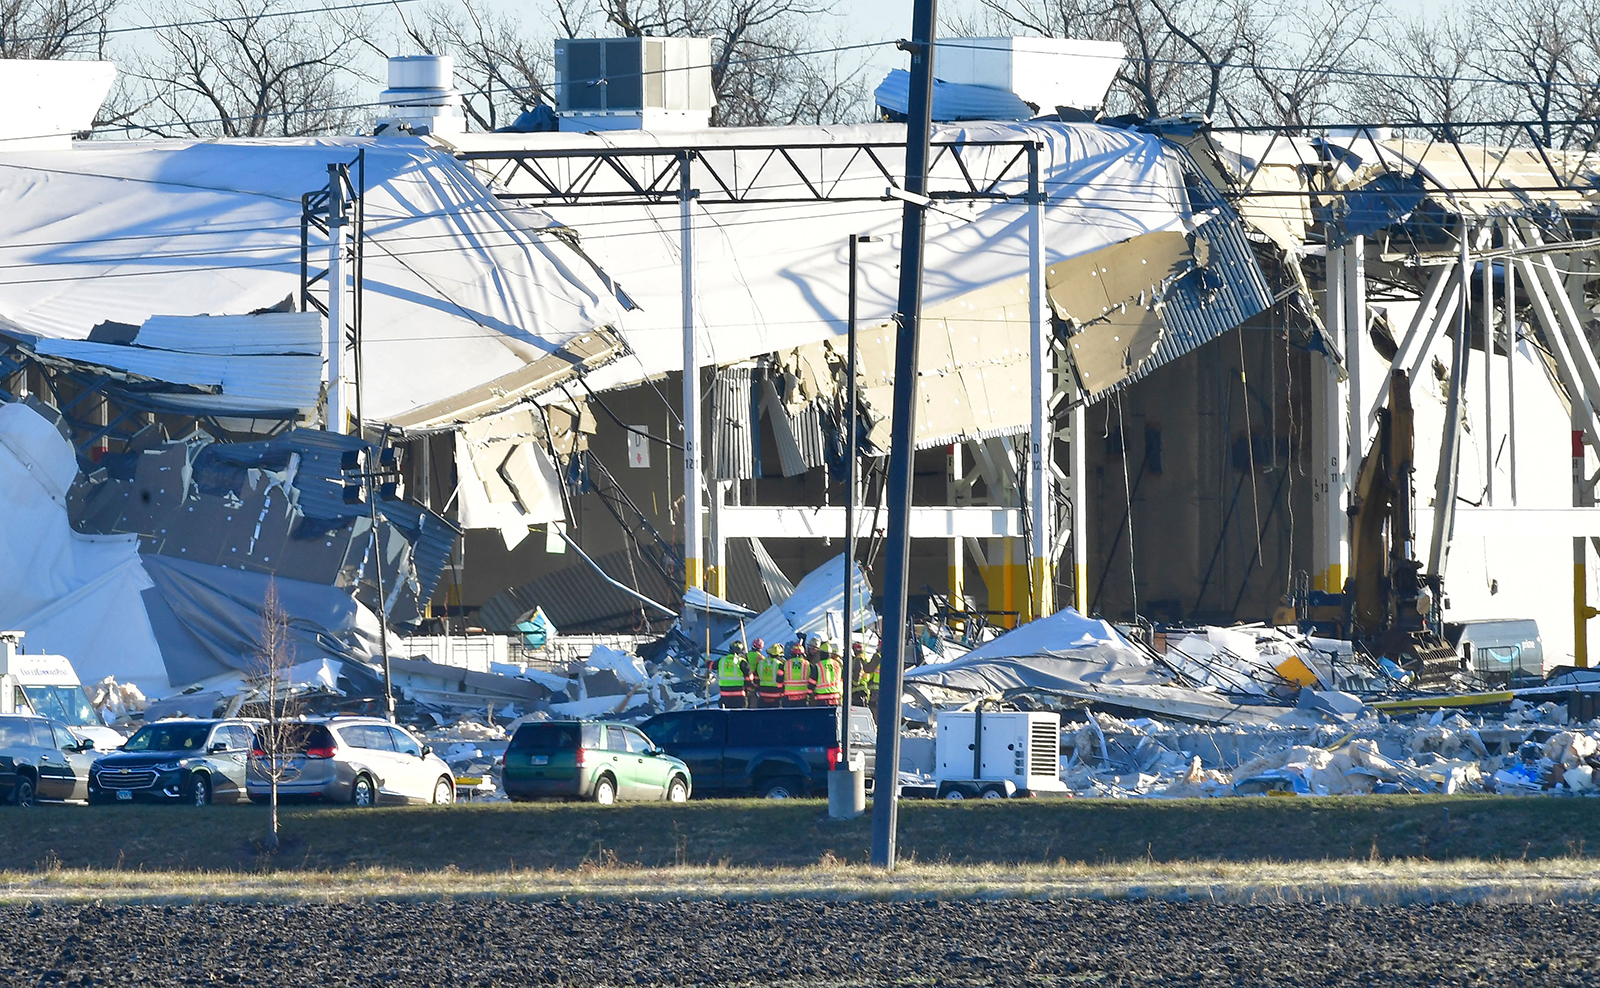 Recovery operations continue after the partial collapse of an Amazon Fulfillment Center in Edwardsville, Illinois on December 12, 2021.